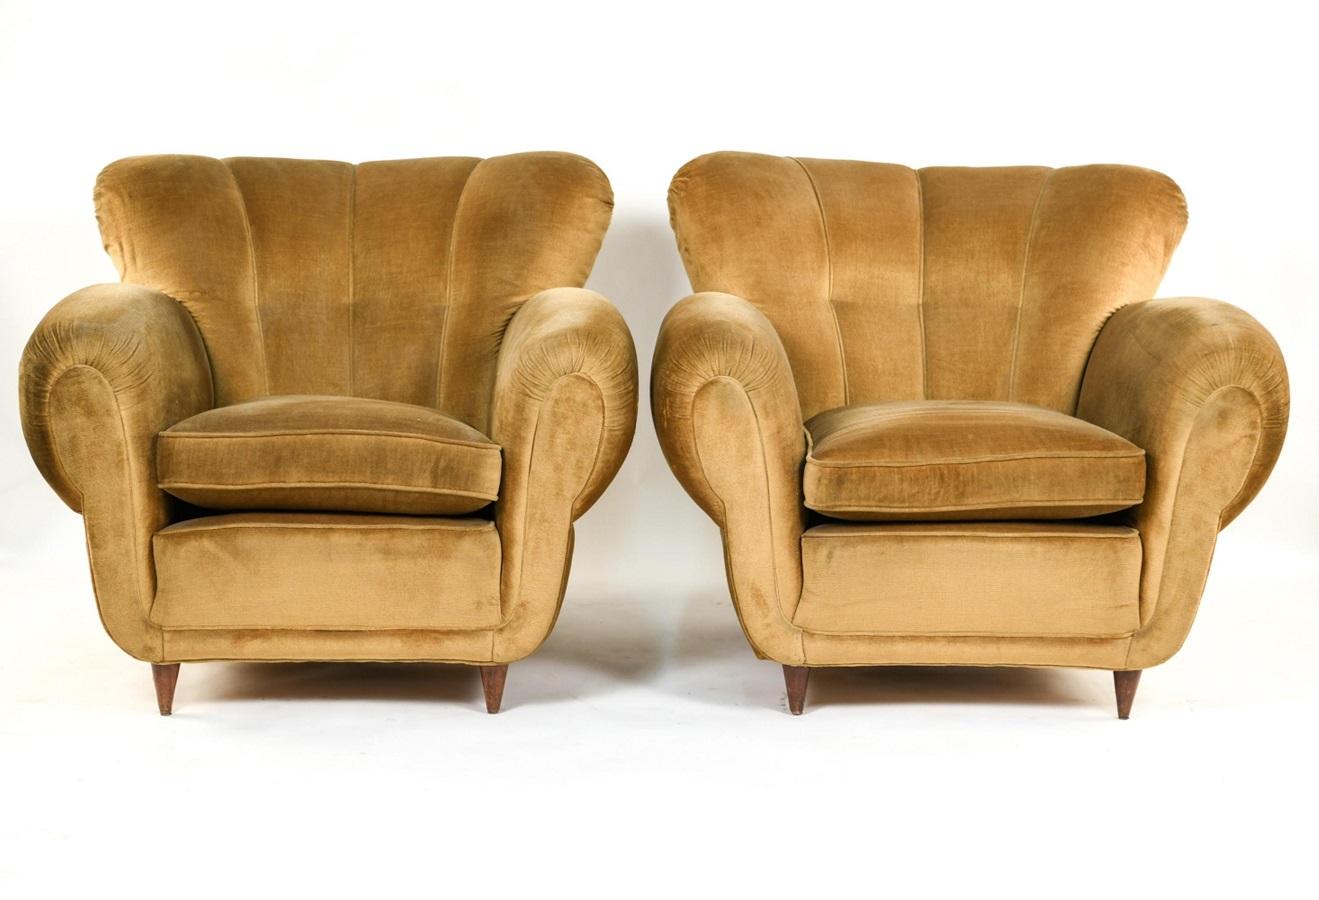 Pair of 1940s Italian lounge chairs attributed to Guglielmo Ulrich. The chairs has the original mohair fabric with walnut legs.